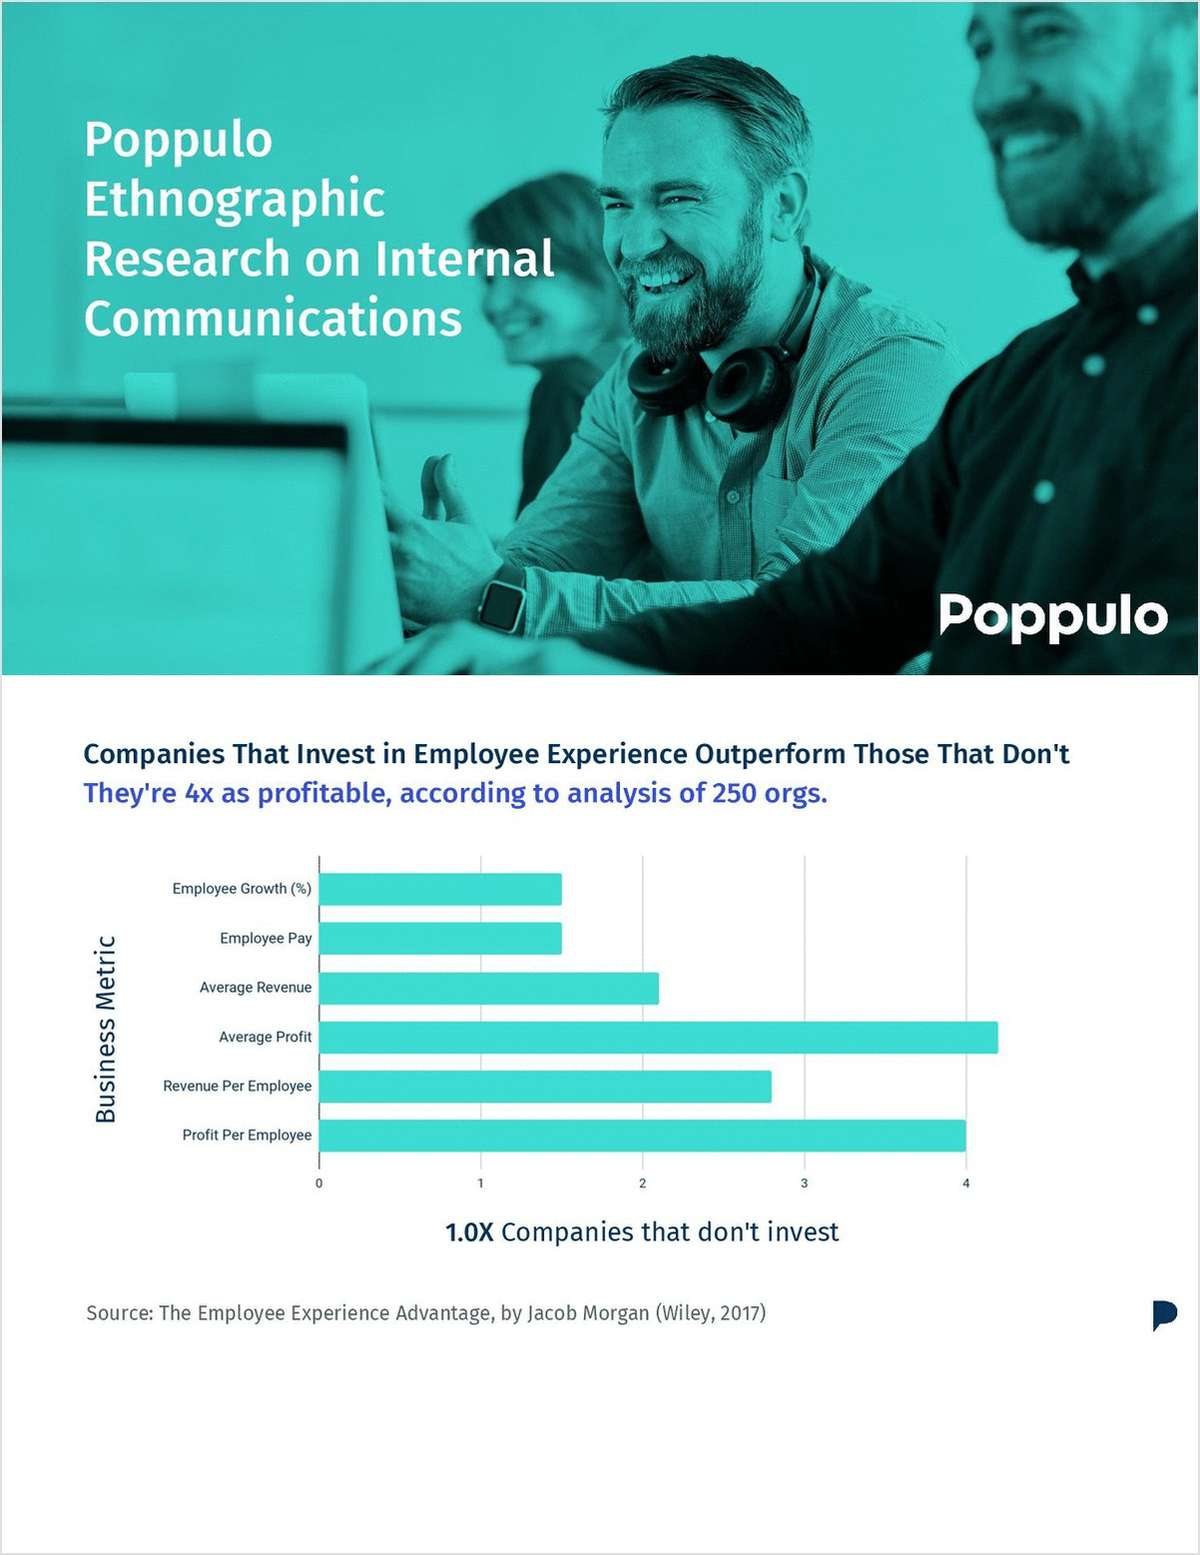 Poppulo Ethnographic Research on Internal Communications